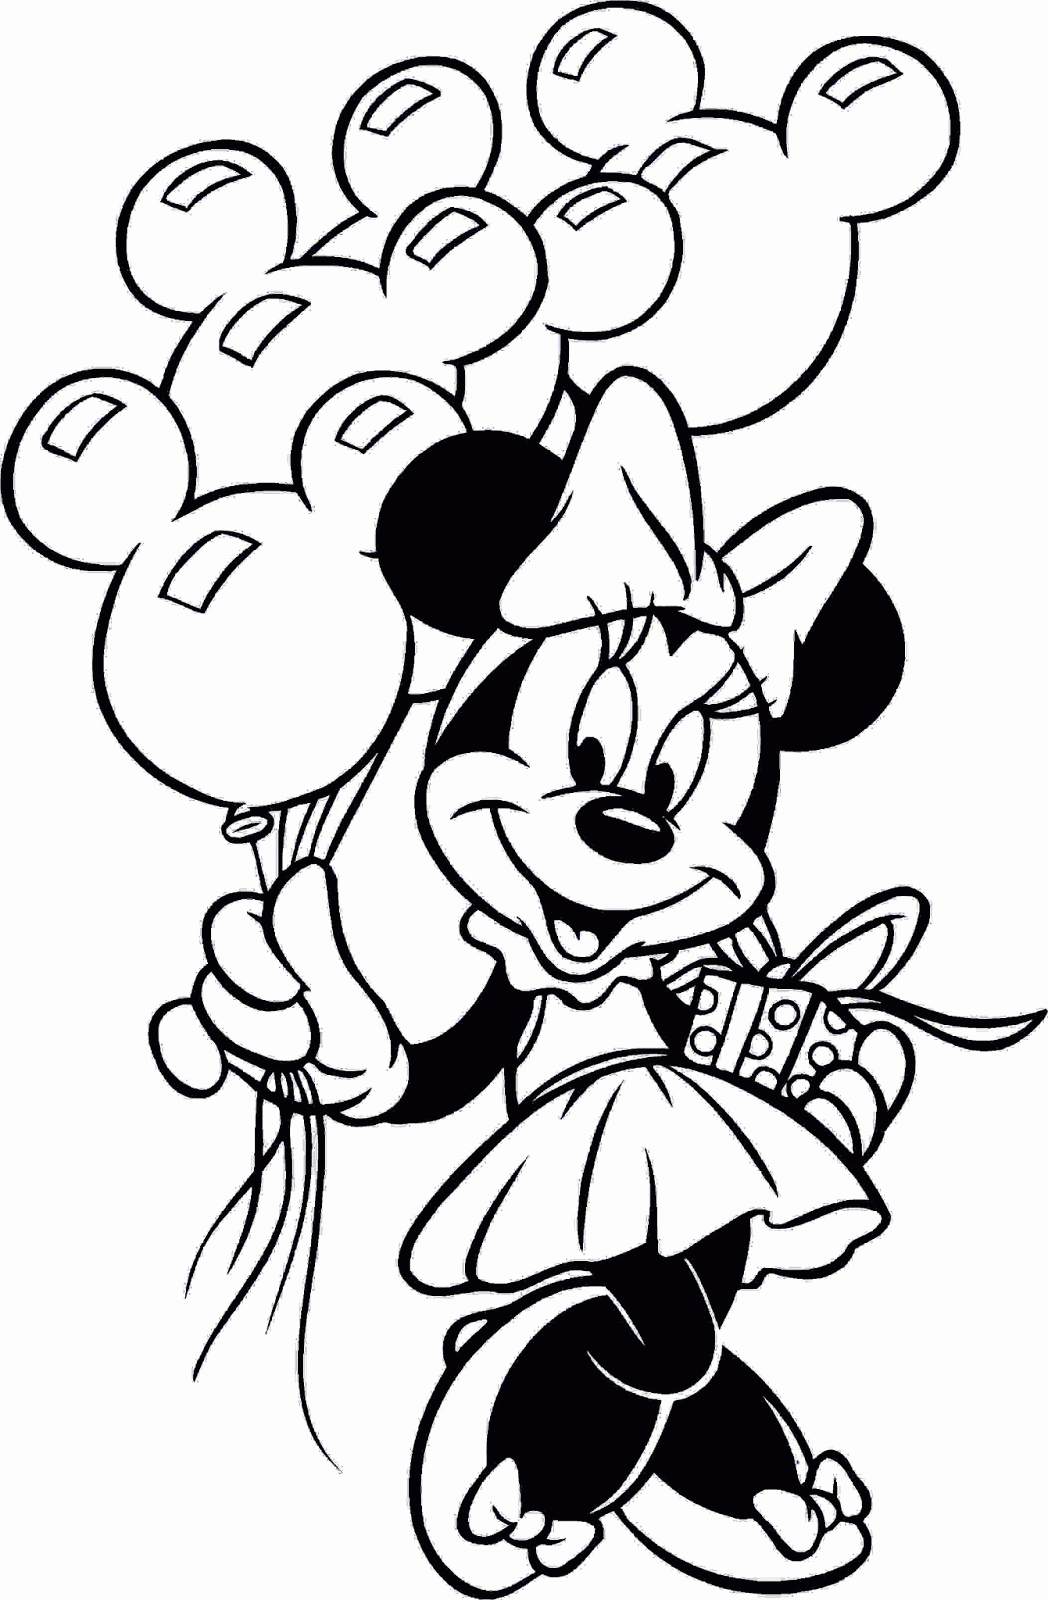 Mickey Mouse Coloring Pages Bake Az   Coloring Home